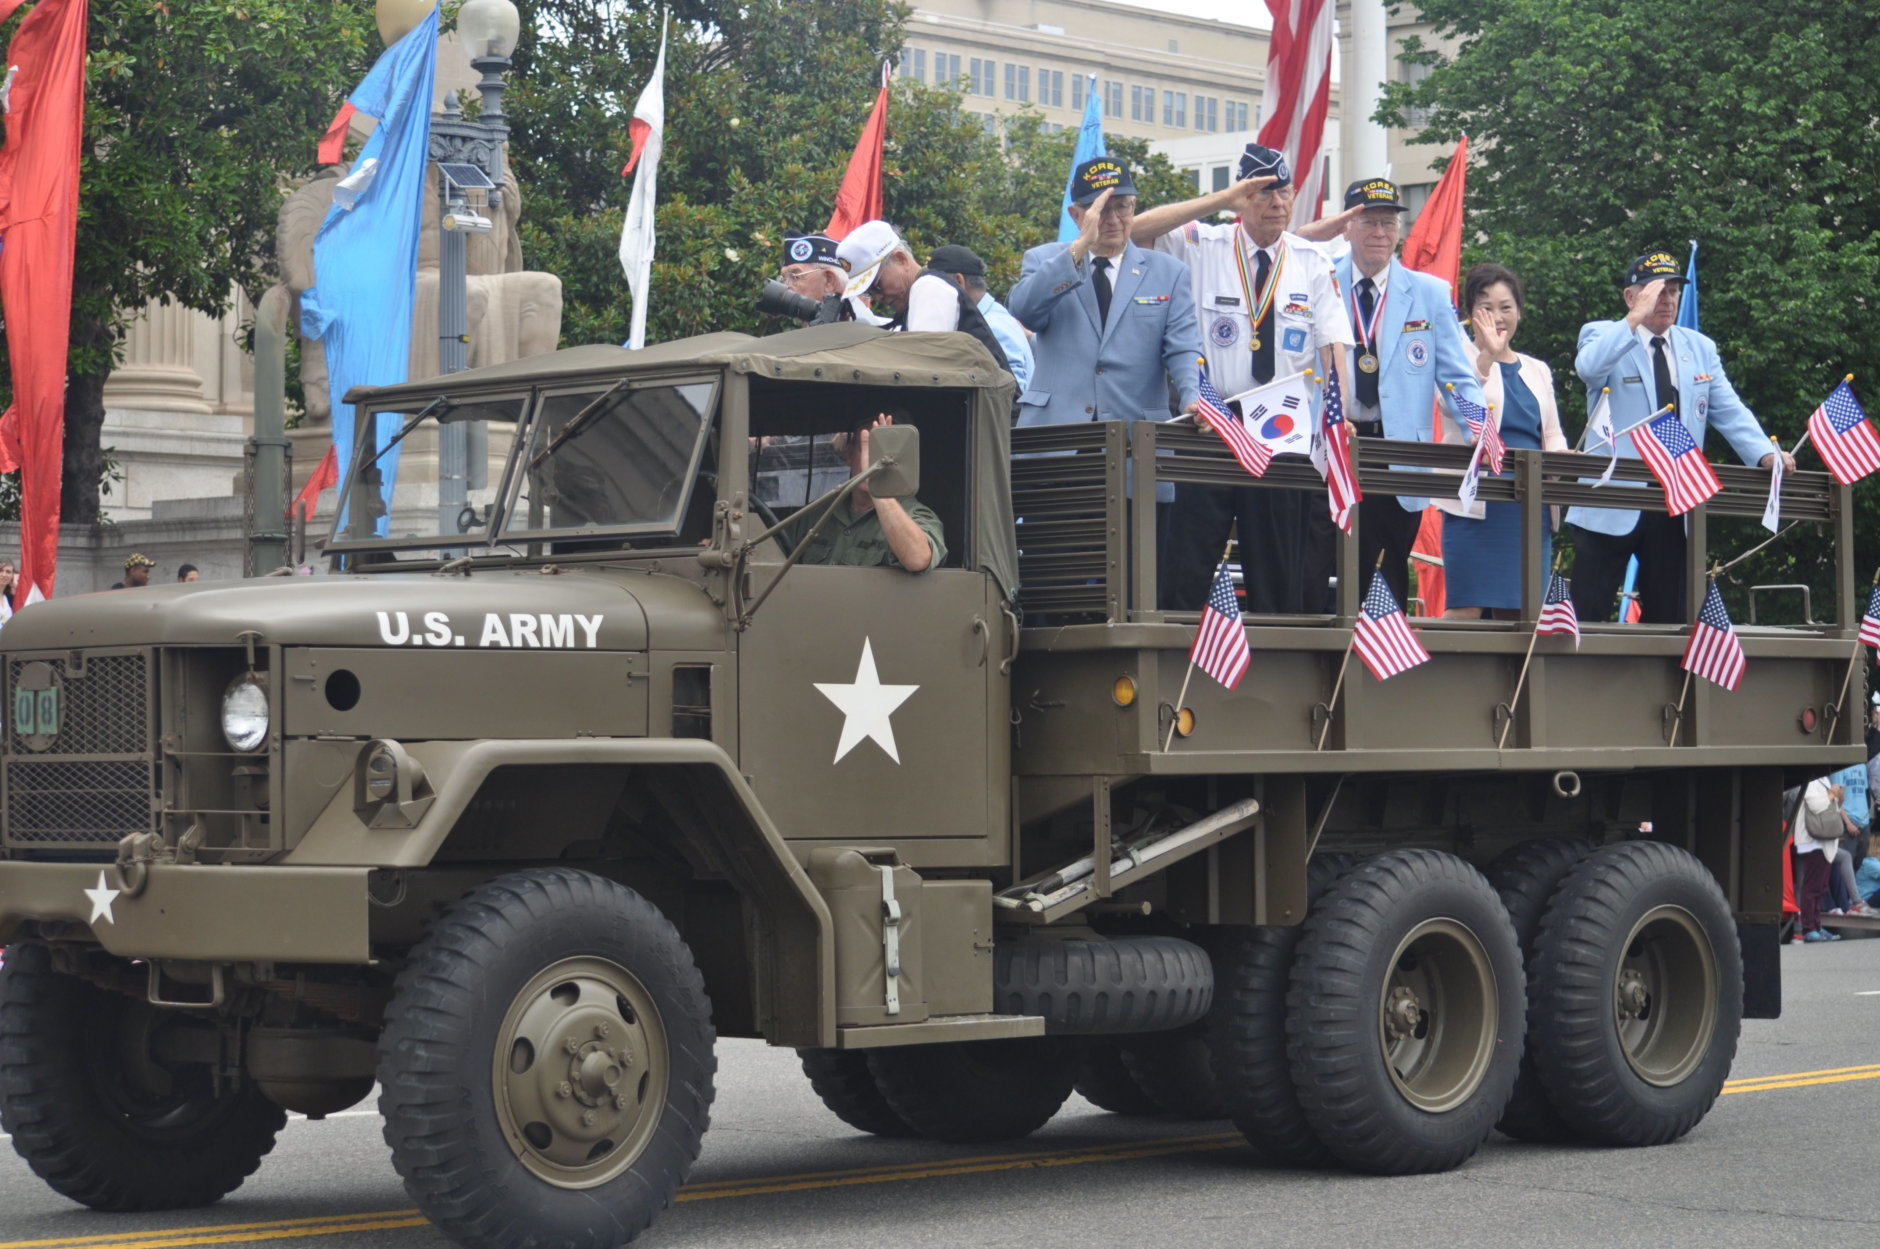 A float honoring the fallen heroes from the Revolutionary War to today is seen at the 2018 National Memorial Day Parade in D.C. (Monique Blyther/WTOP)